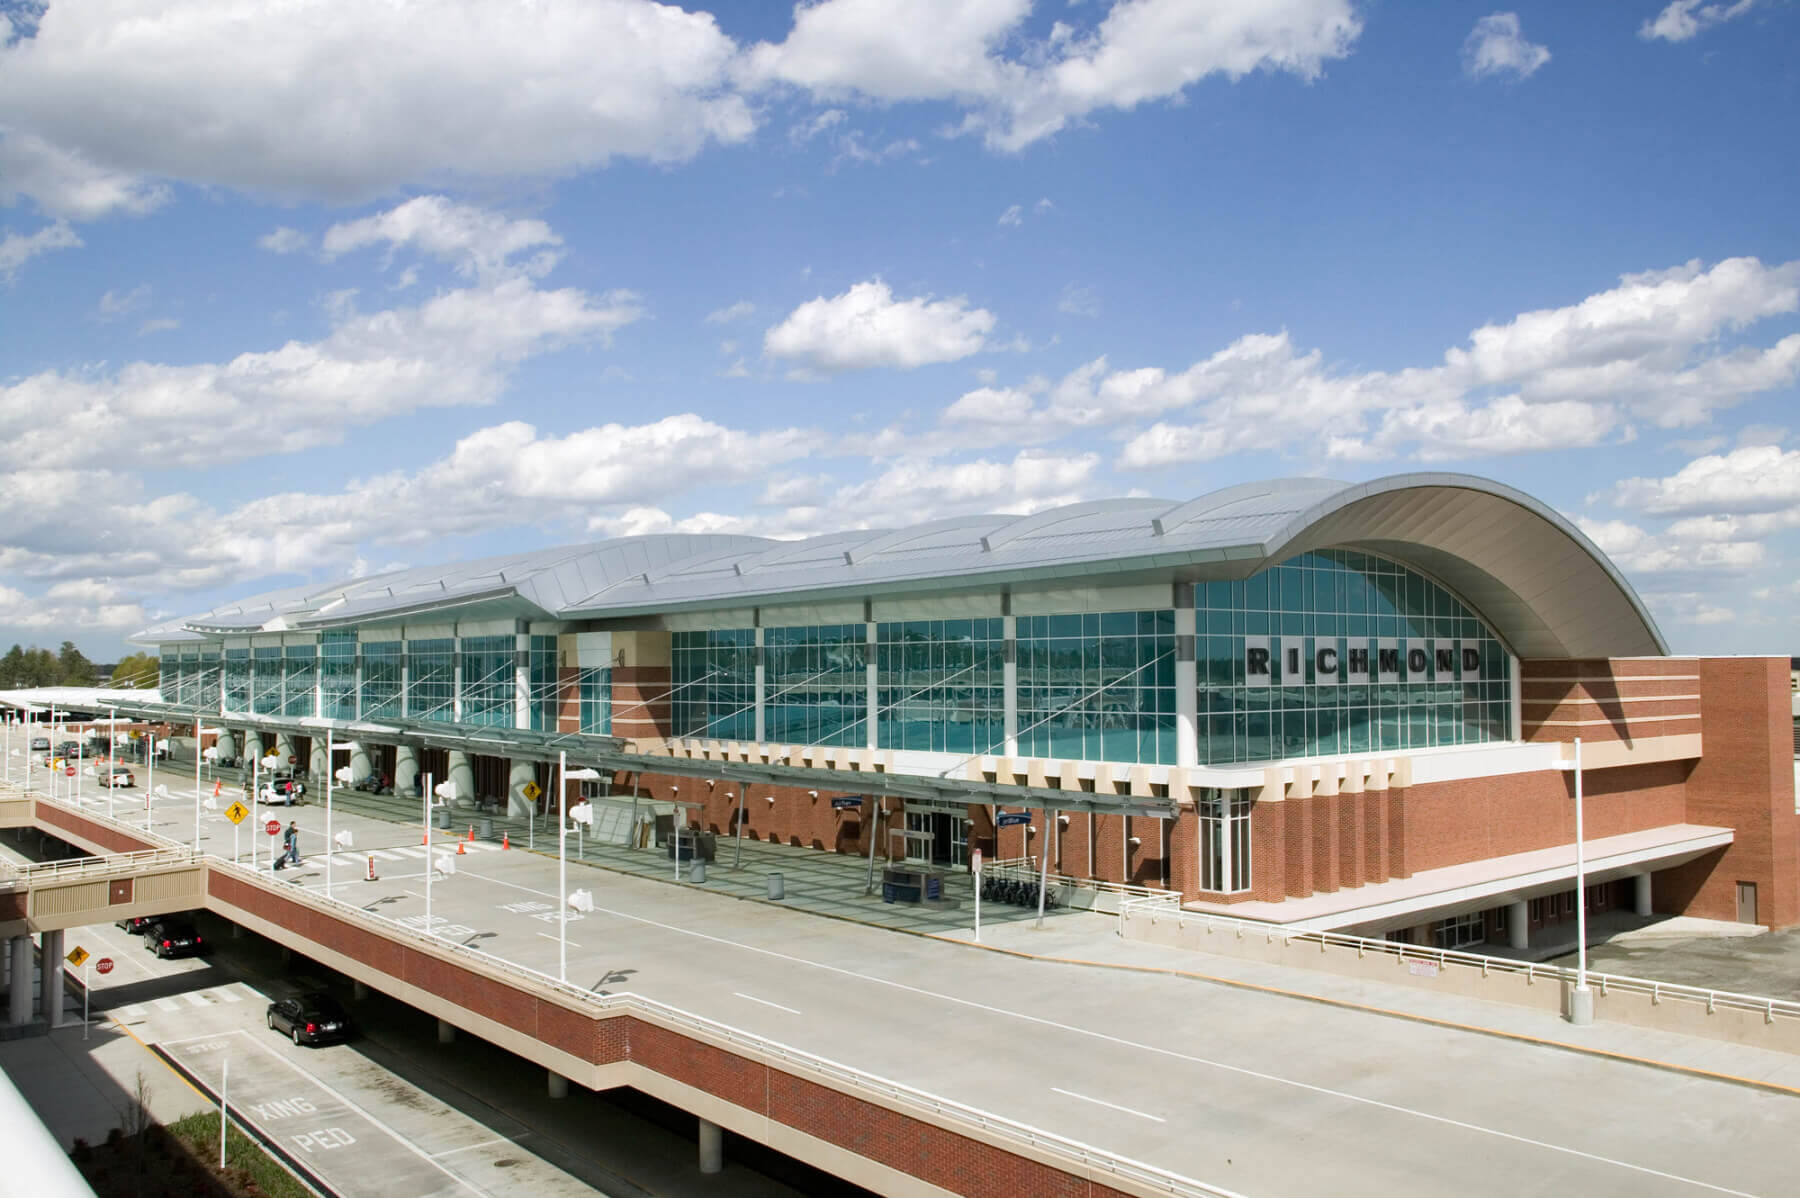 the exterior of the Richmond International Airport terminal building